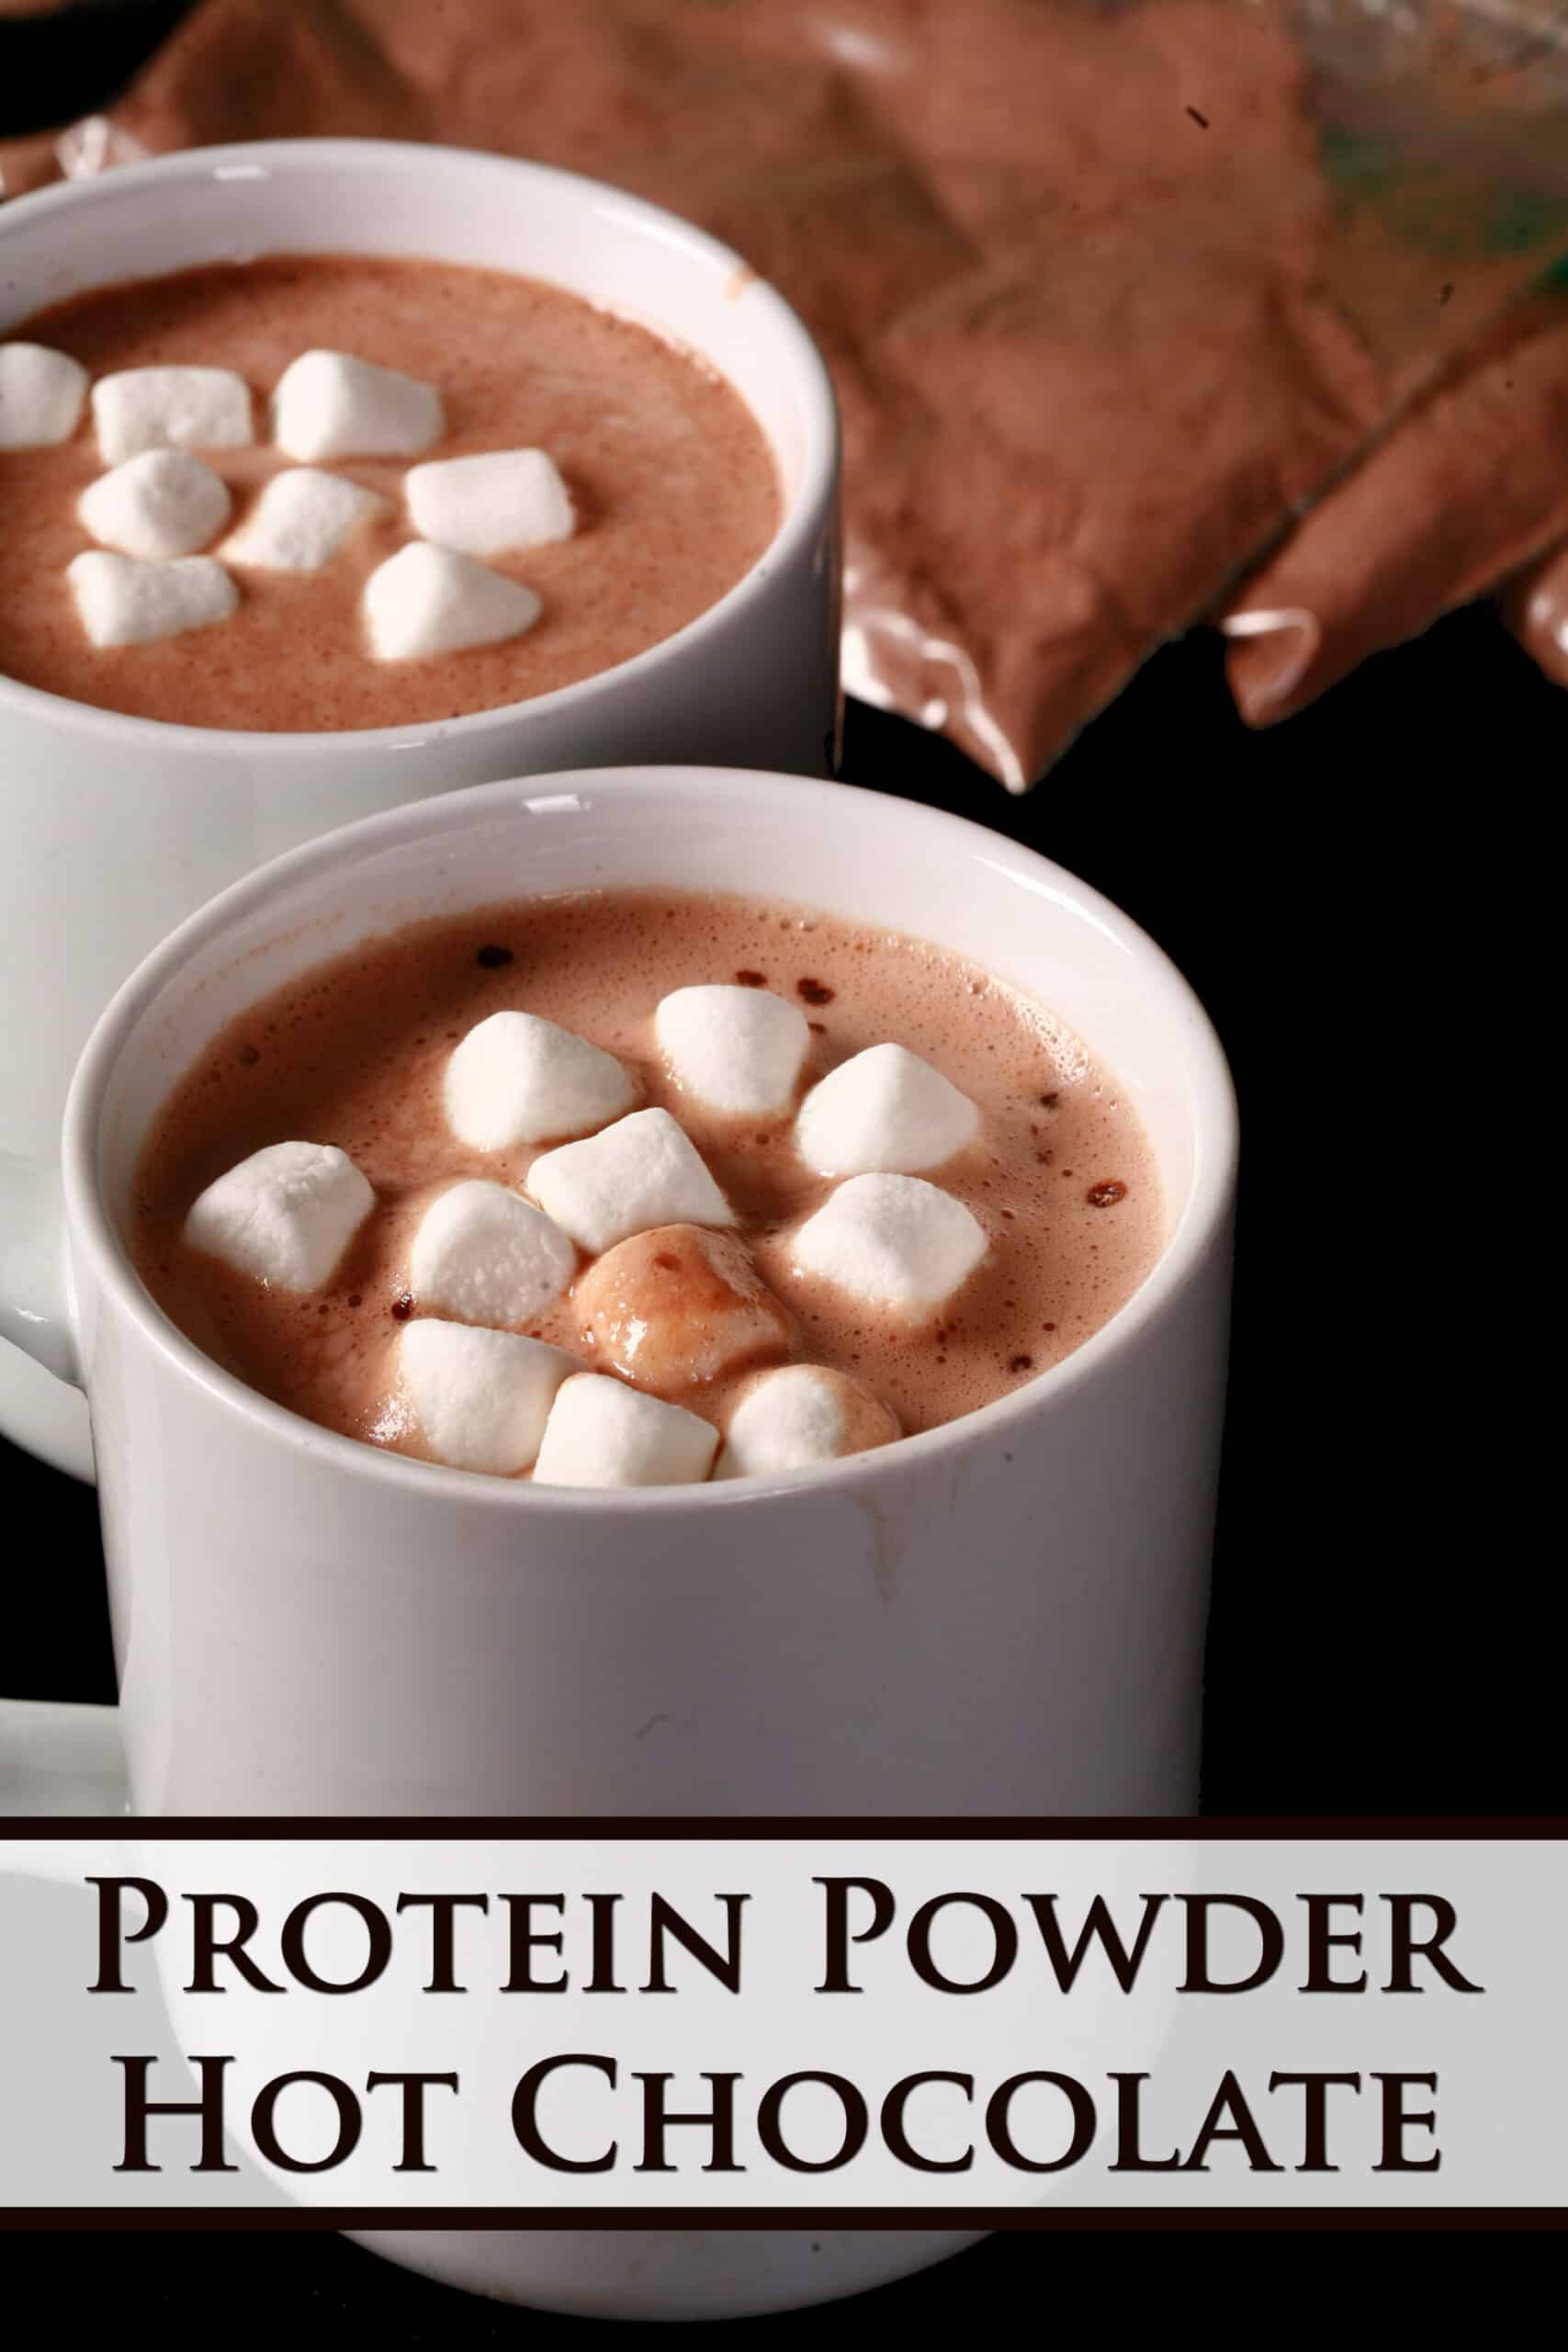 2 mugs of protein hot chocolate and several baggies of mix.  Overlaid text says protein powder hot chocolate.